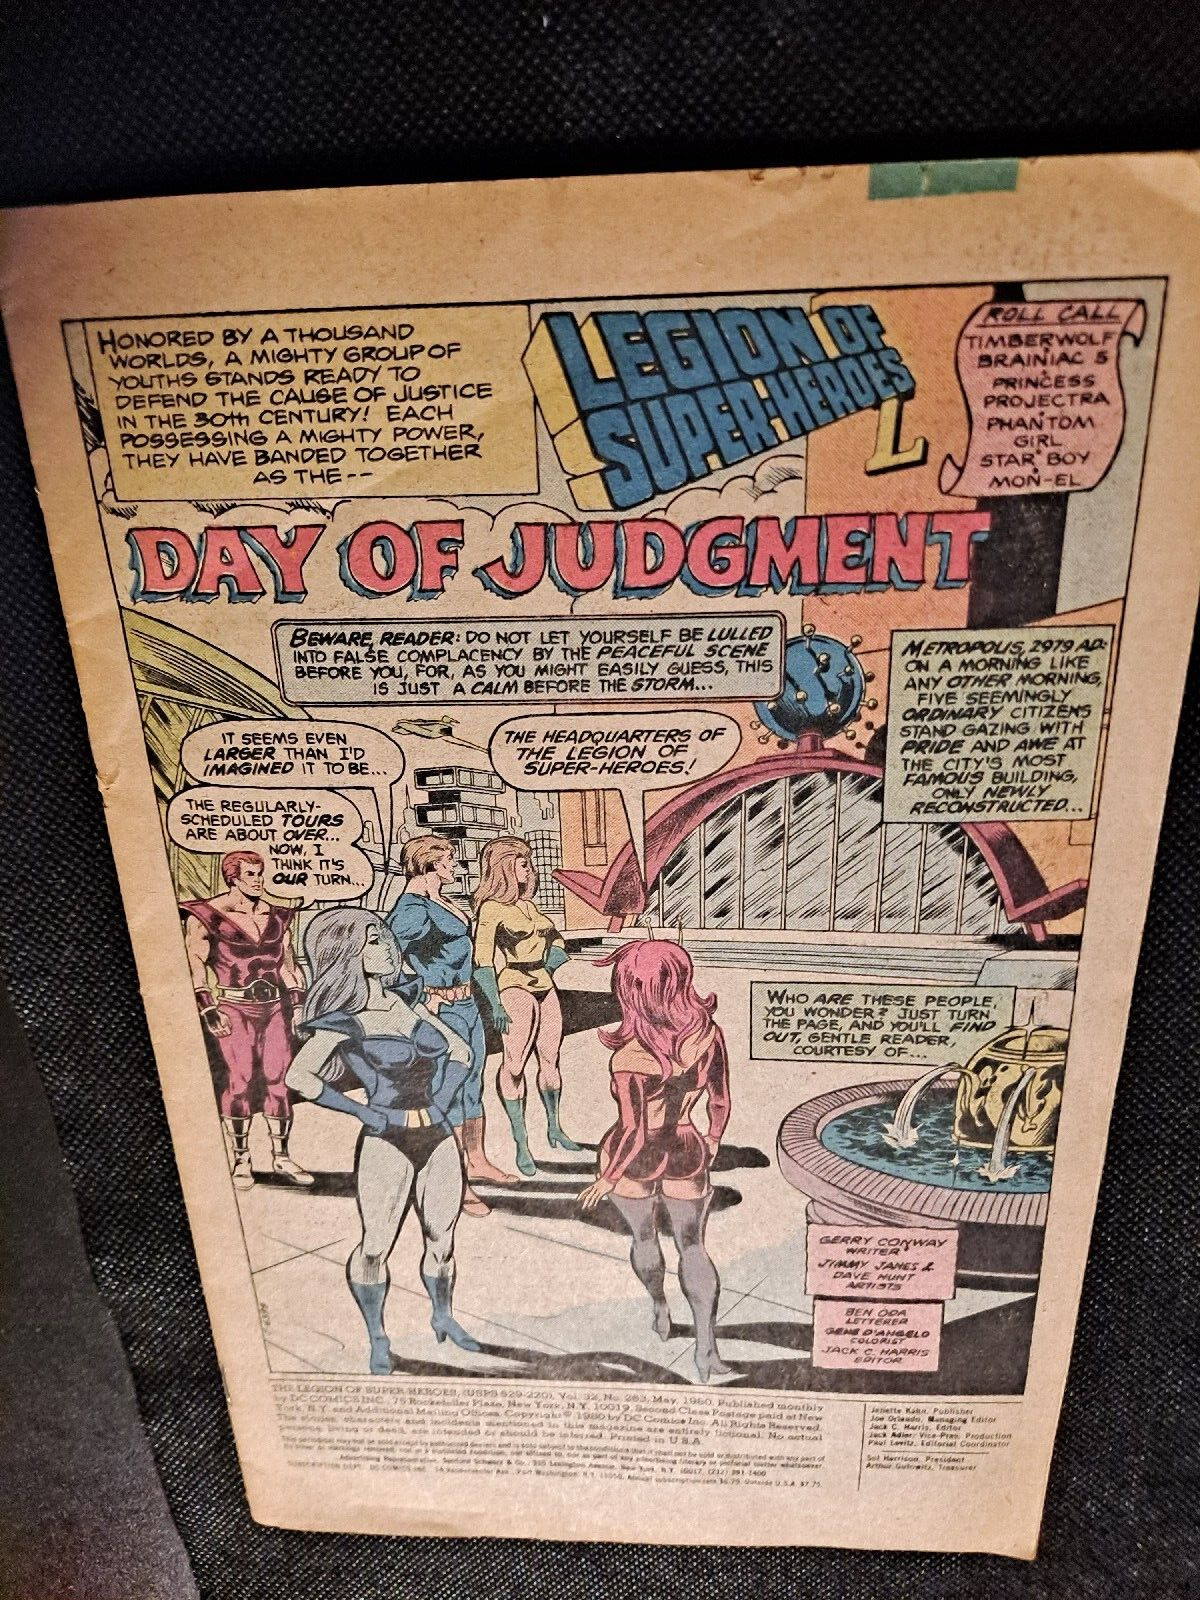 THE LEGION OF SUPER HEROES 1980 DAY OF JUDGMENT  COMIC BOOK!   e8512UXX